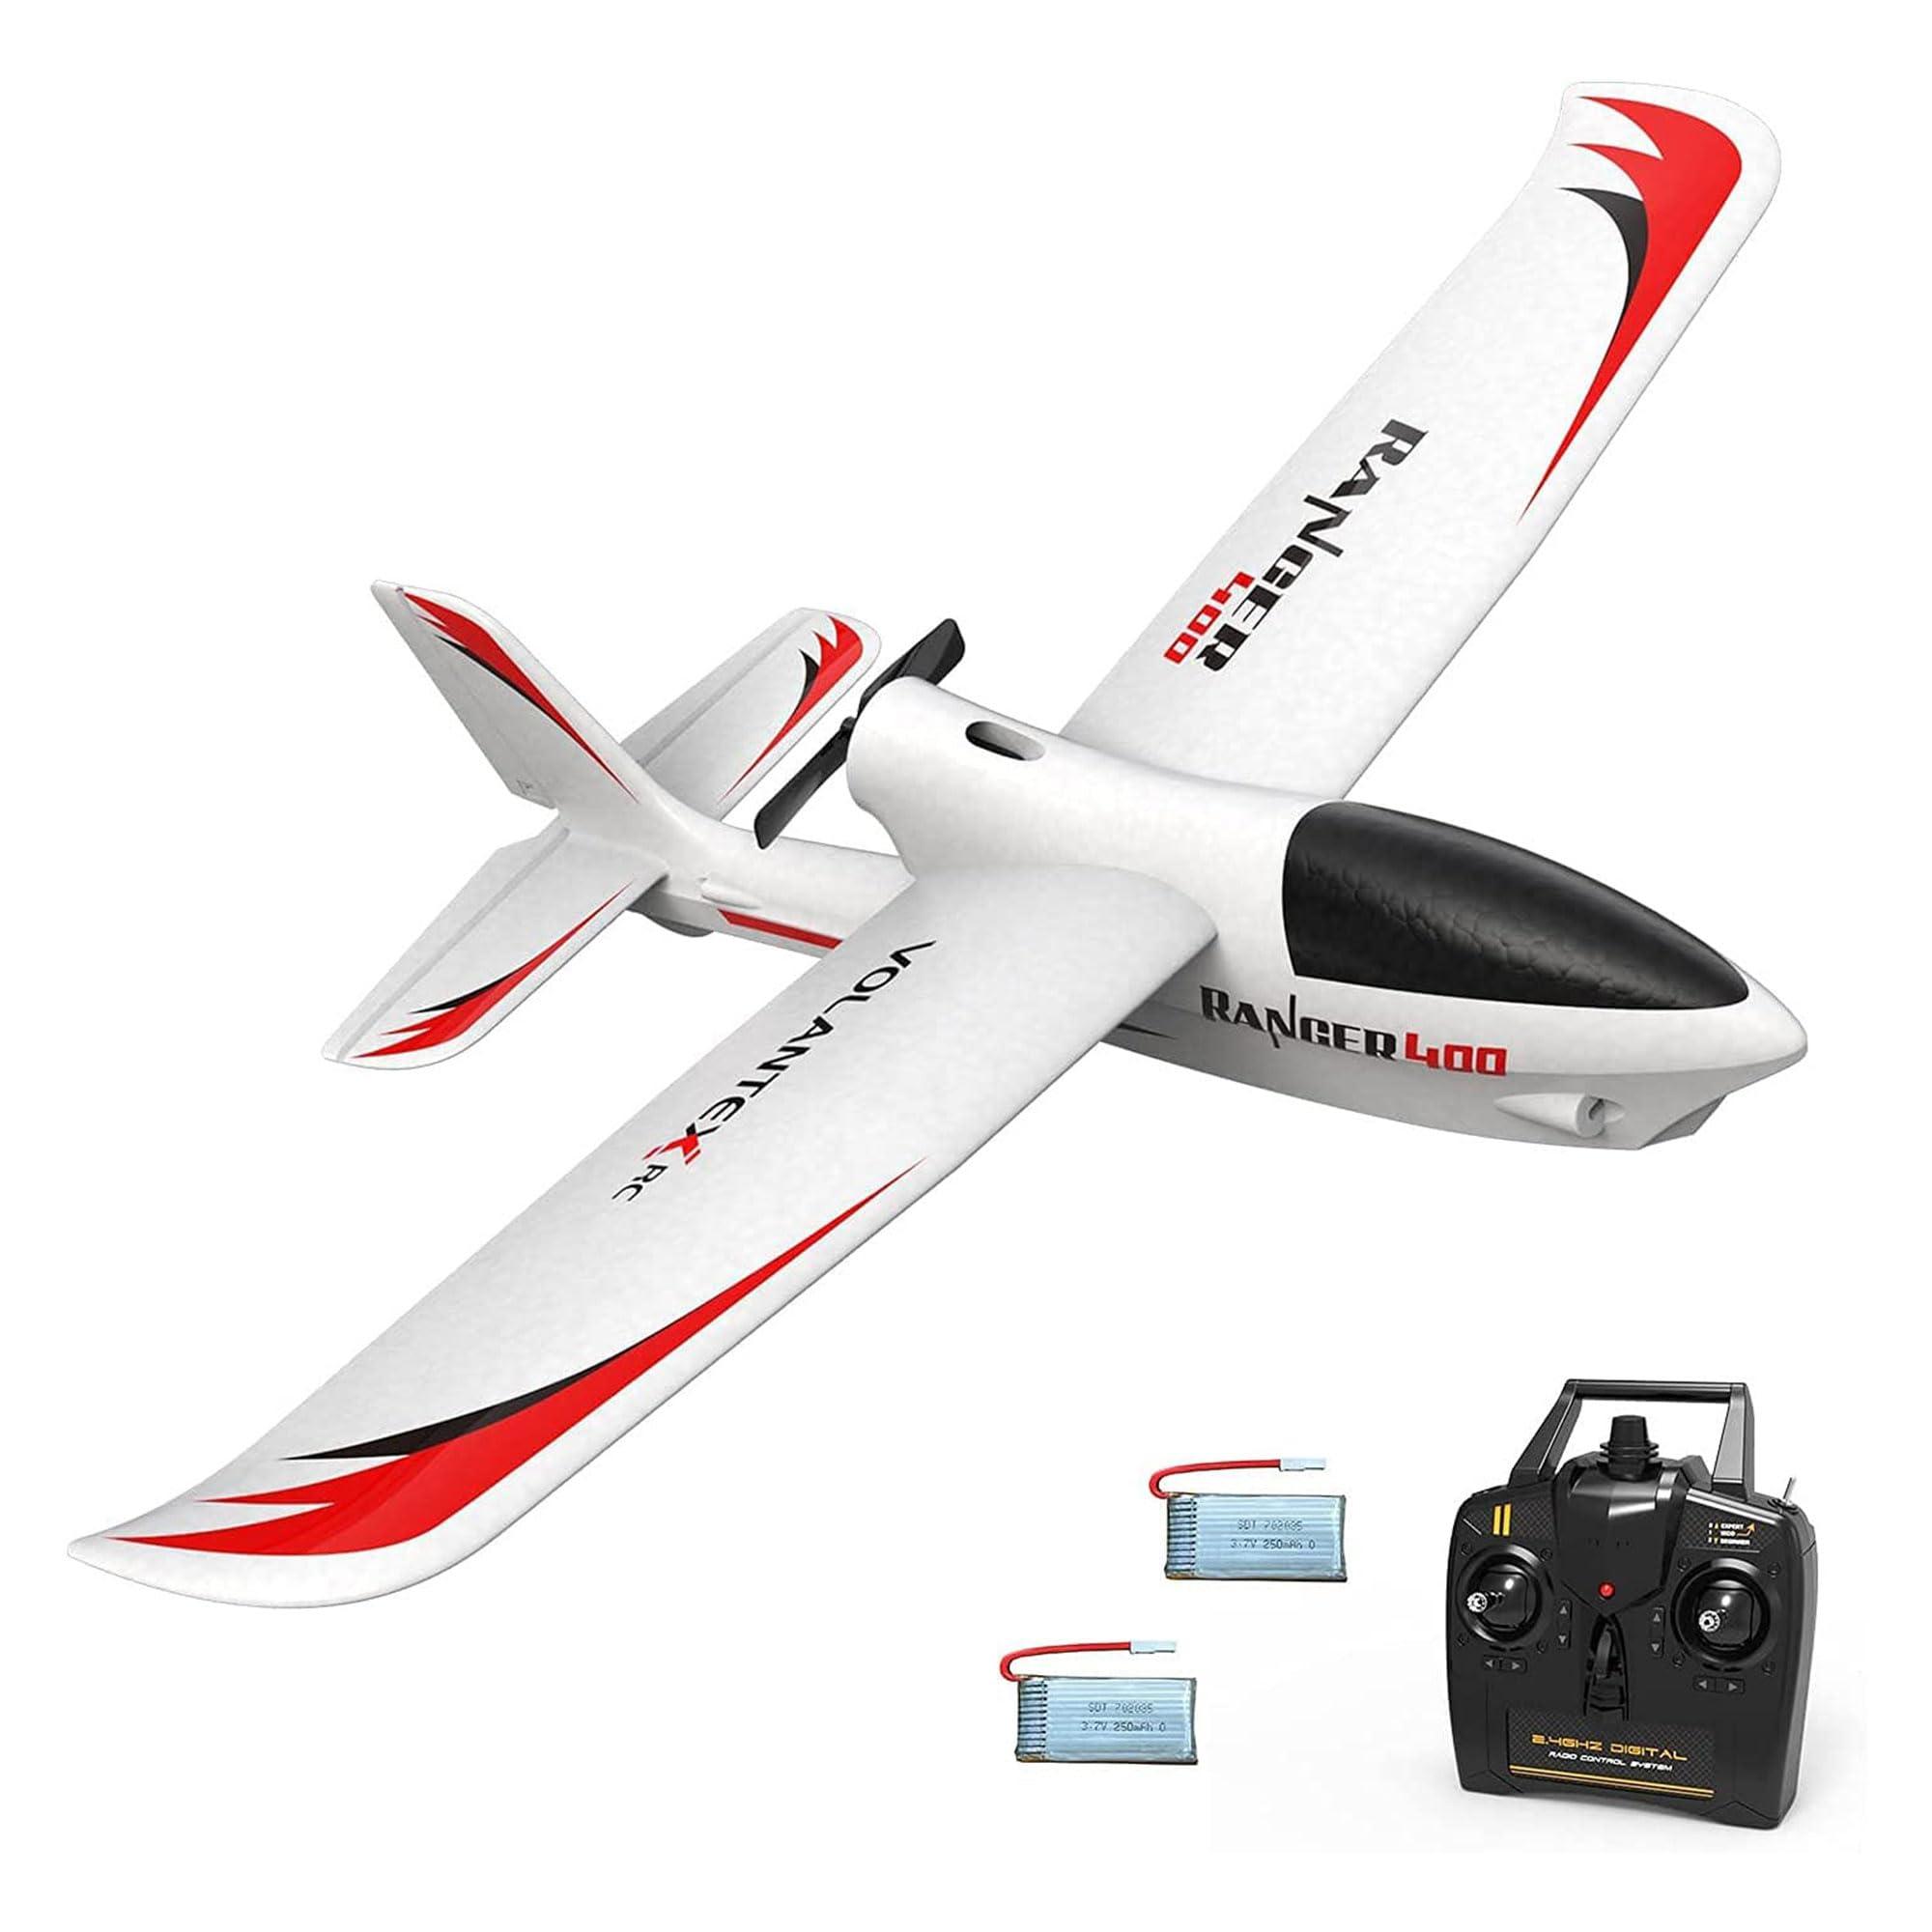 Remote Control Aeroplane With Camera: Remote control planes with cameras: Exploring different uses and options.